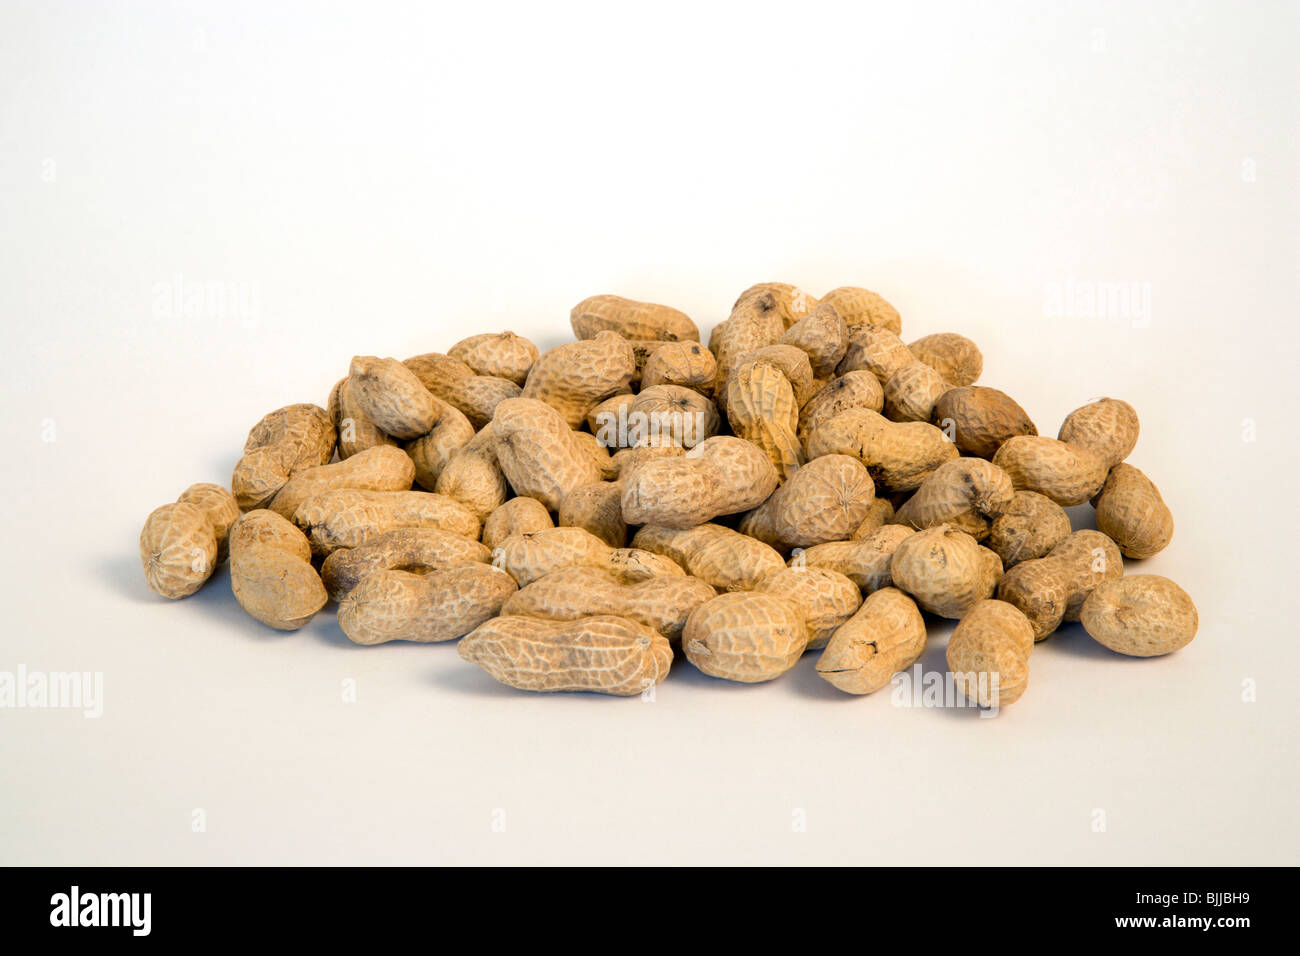 USA, Food, Nuts, Groundnuts Peanuts in their kernels on a white background. Stock Photo